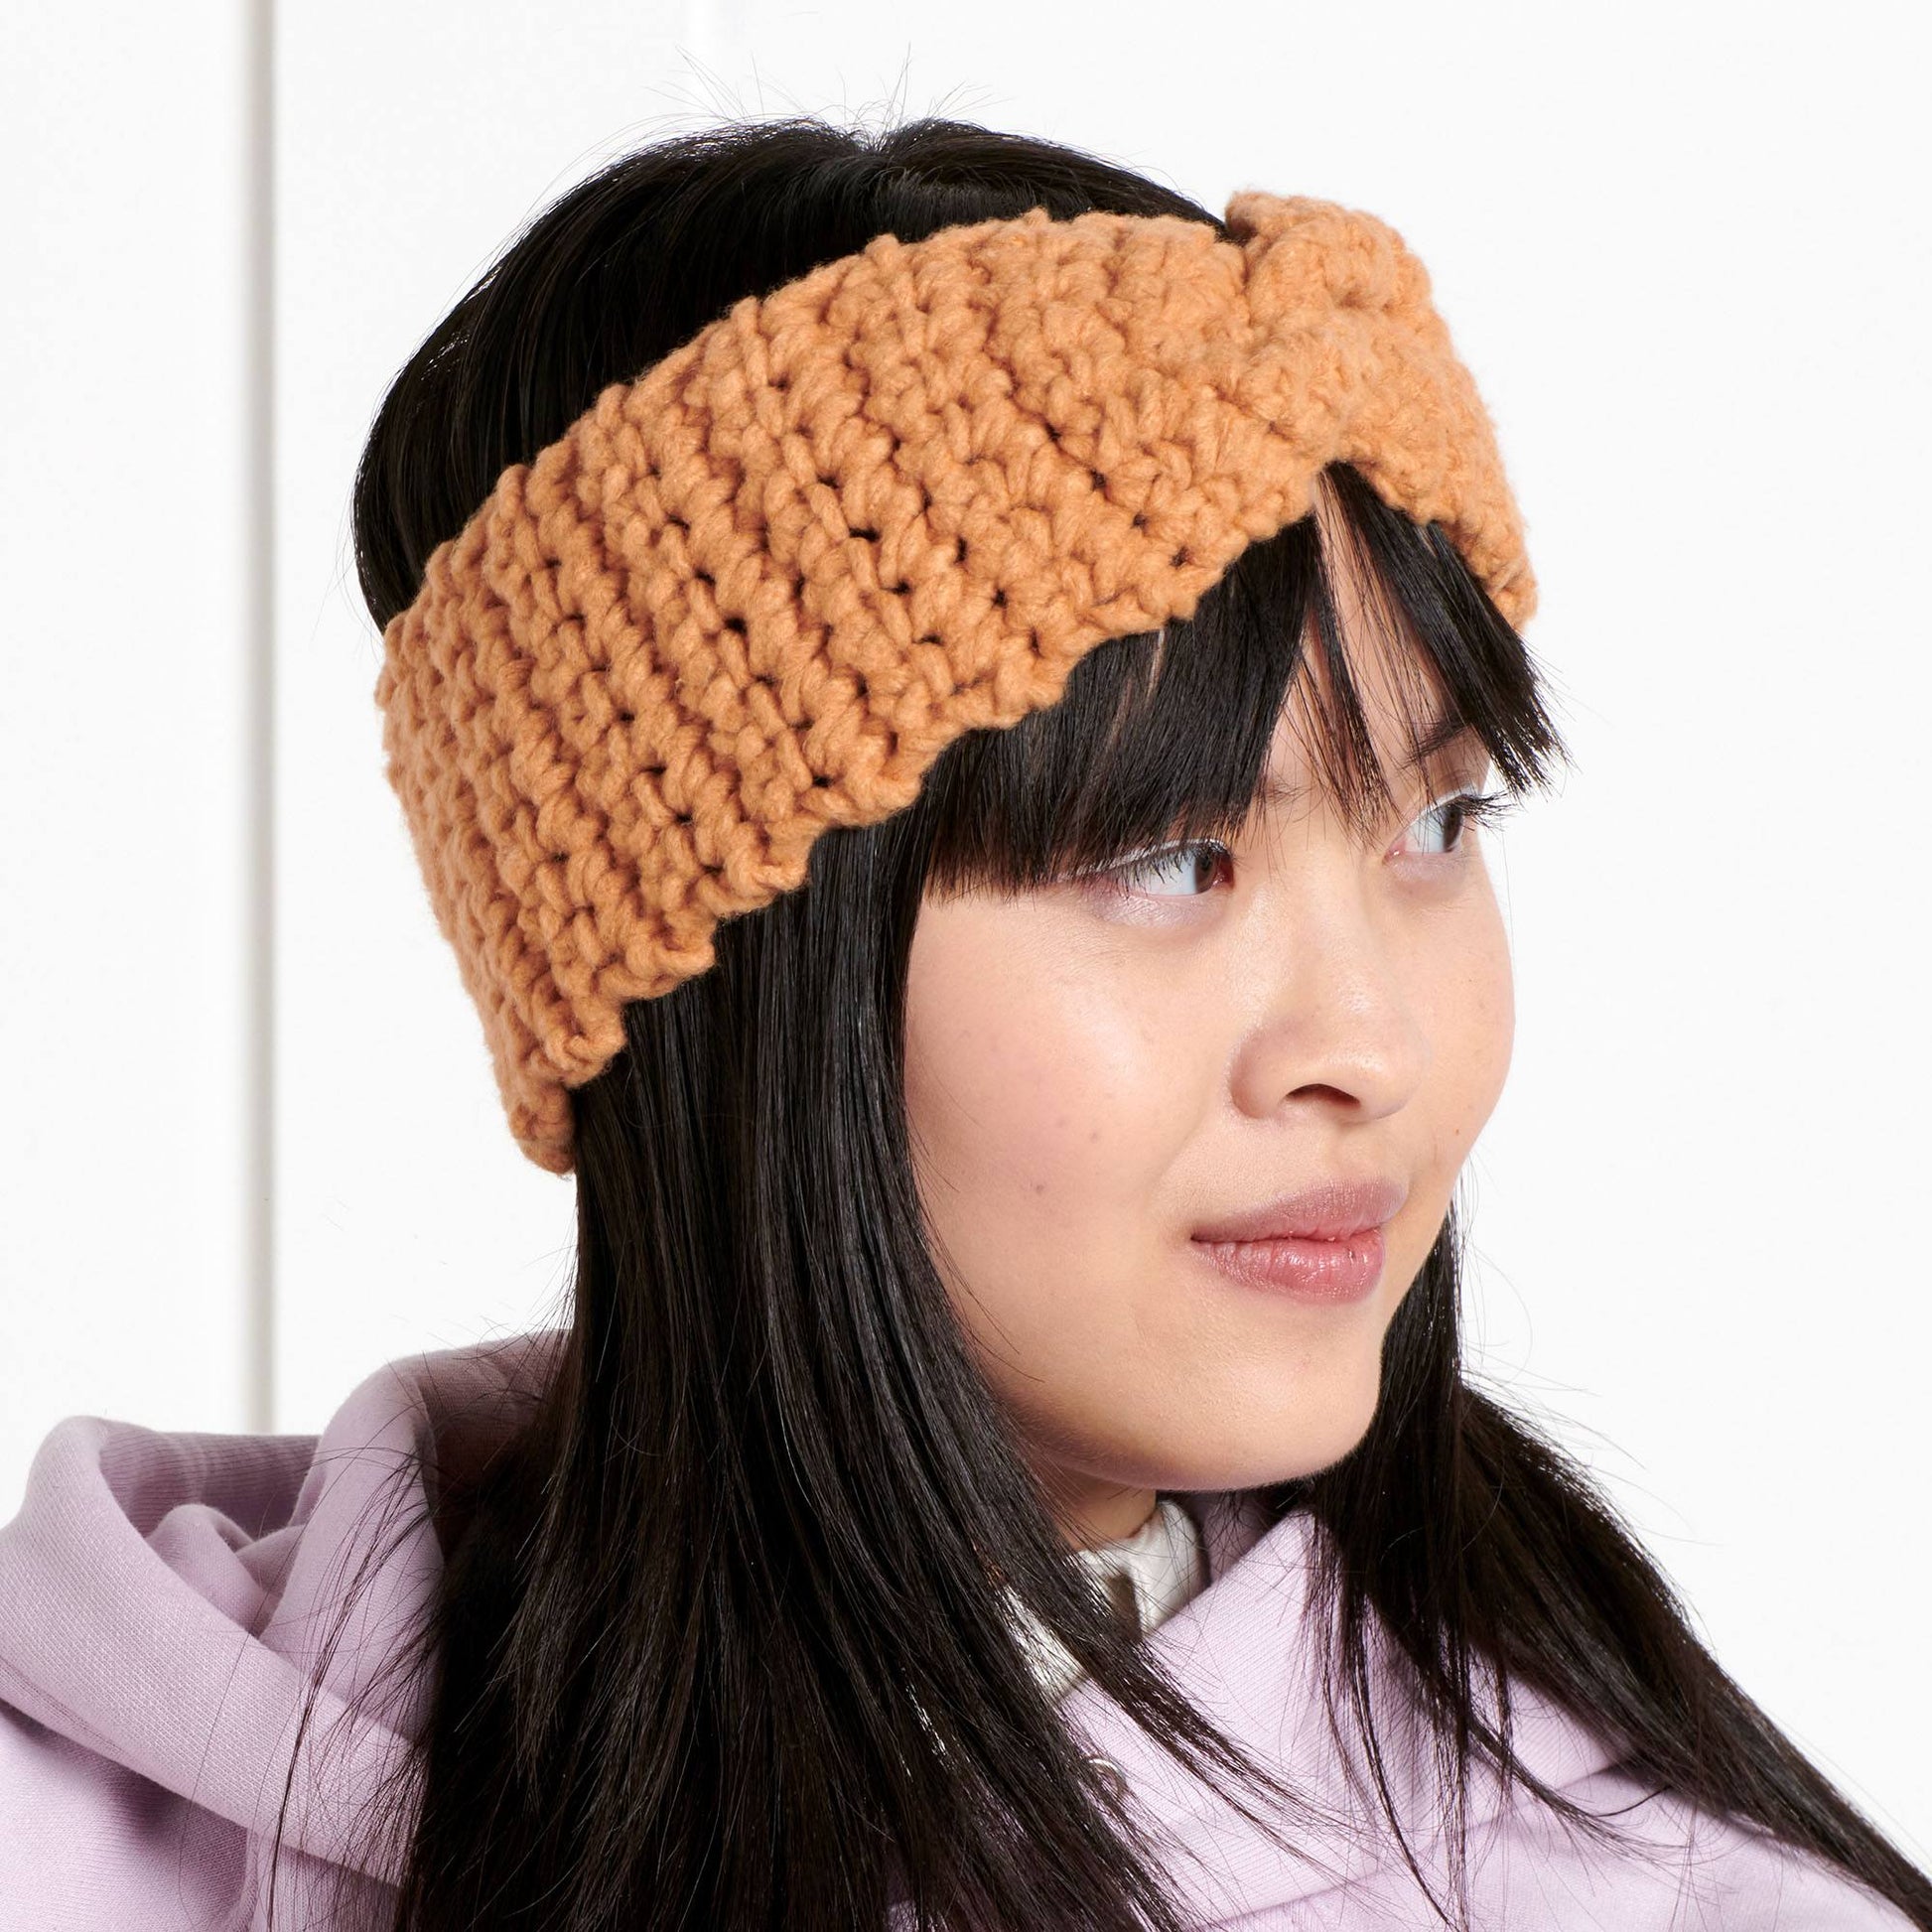 How to knit a headband with a twist